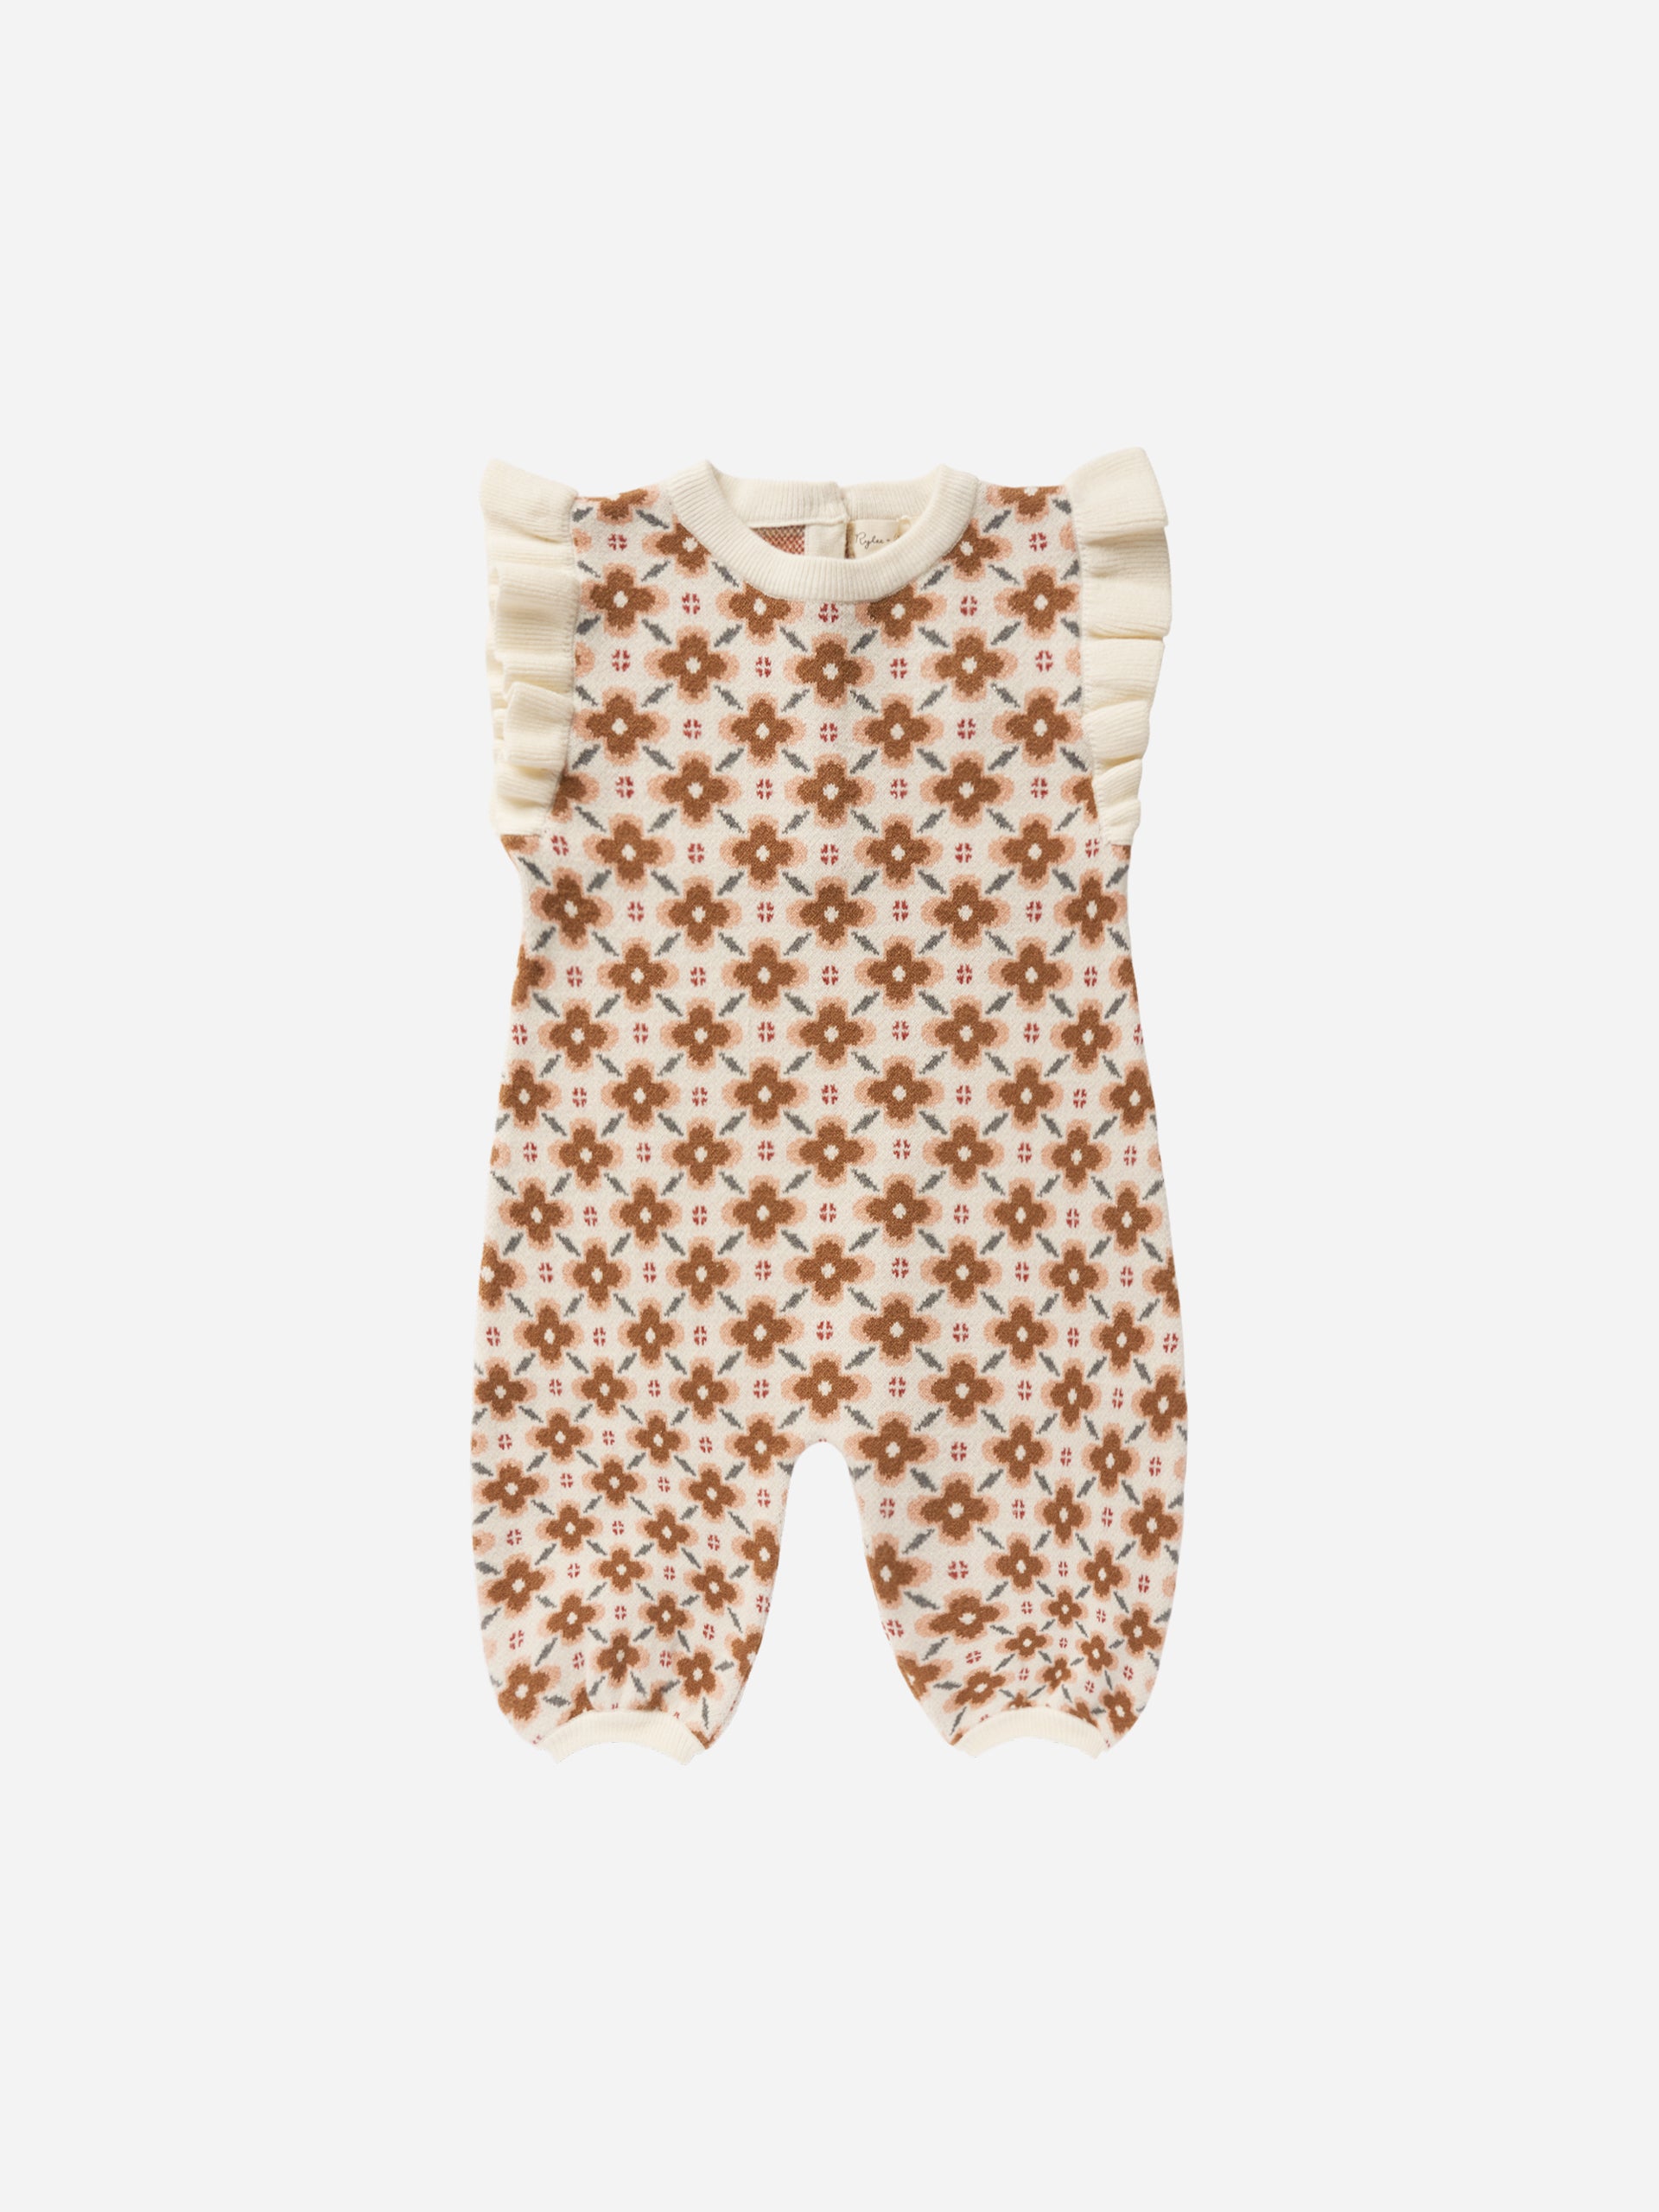 Stella Knit Jumpsuit || Mosaic - Rylee + Cru | Kids Clothes | Trendy Baby Clothes | Modern Infant Outfits |